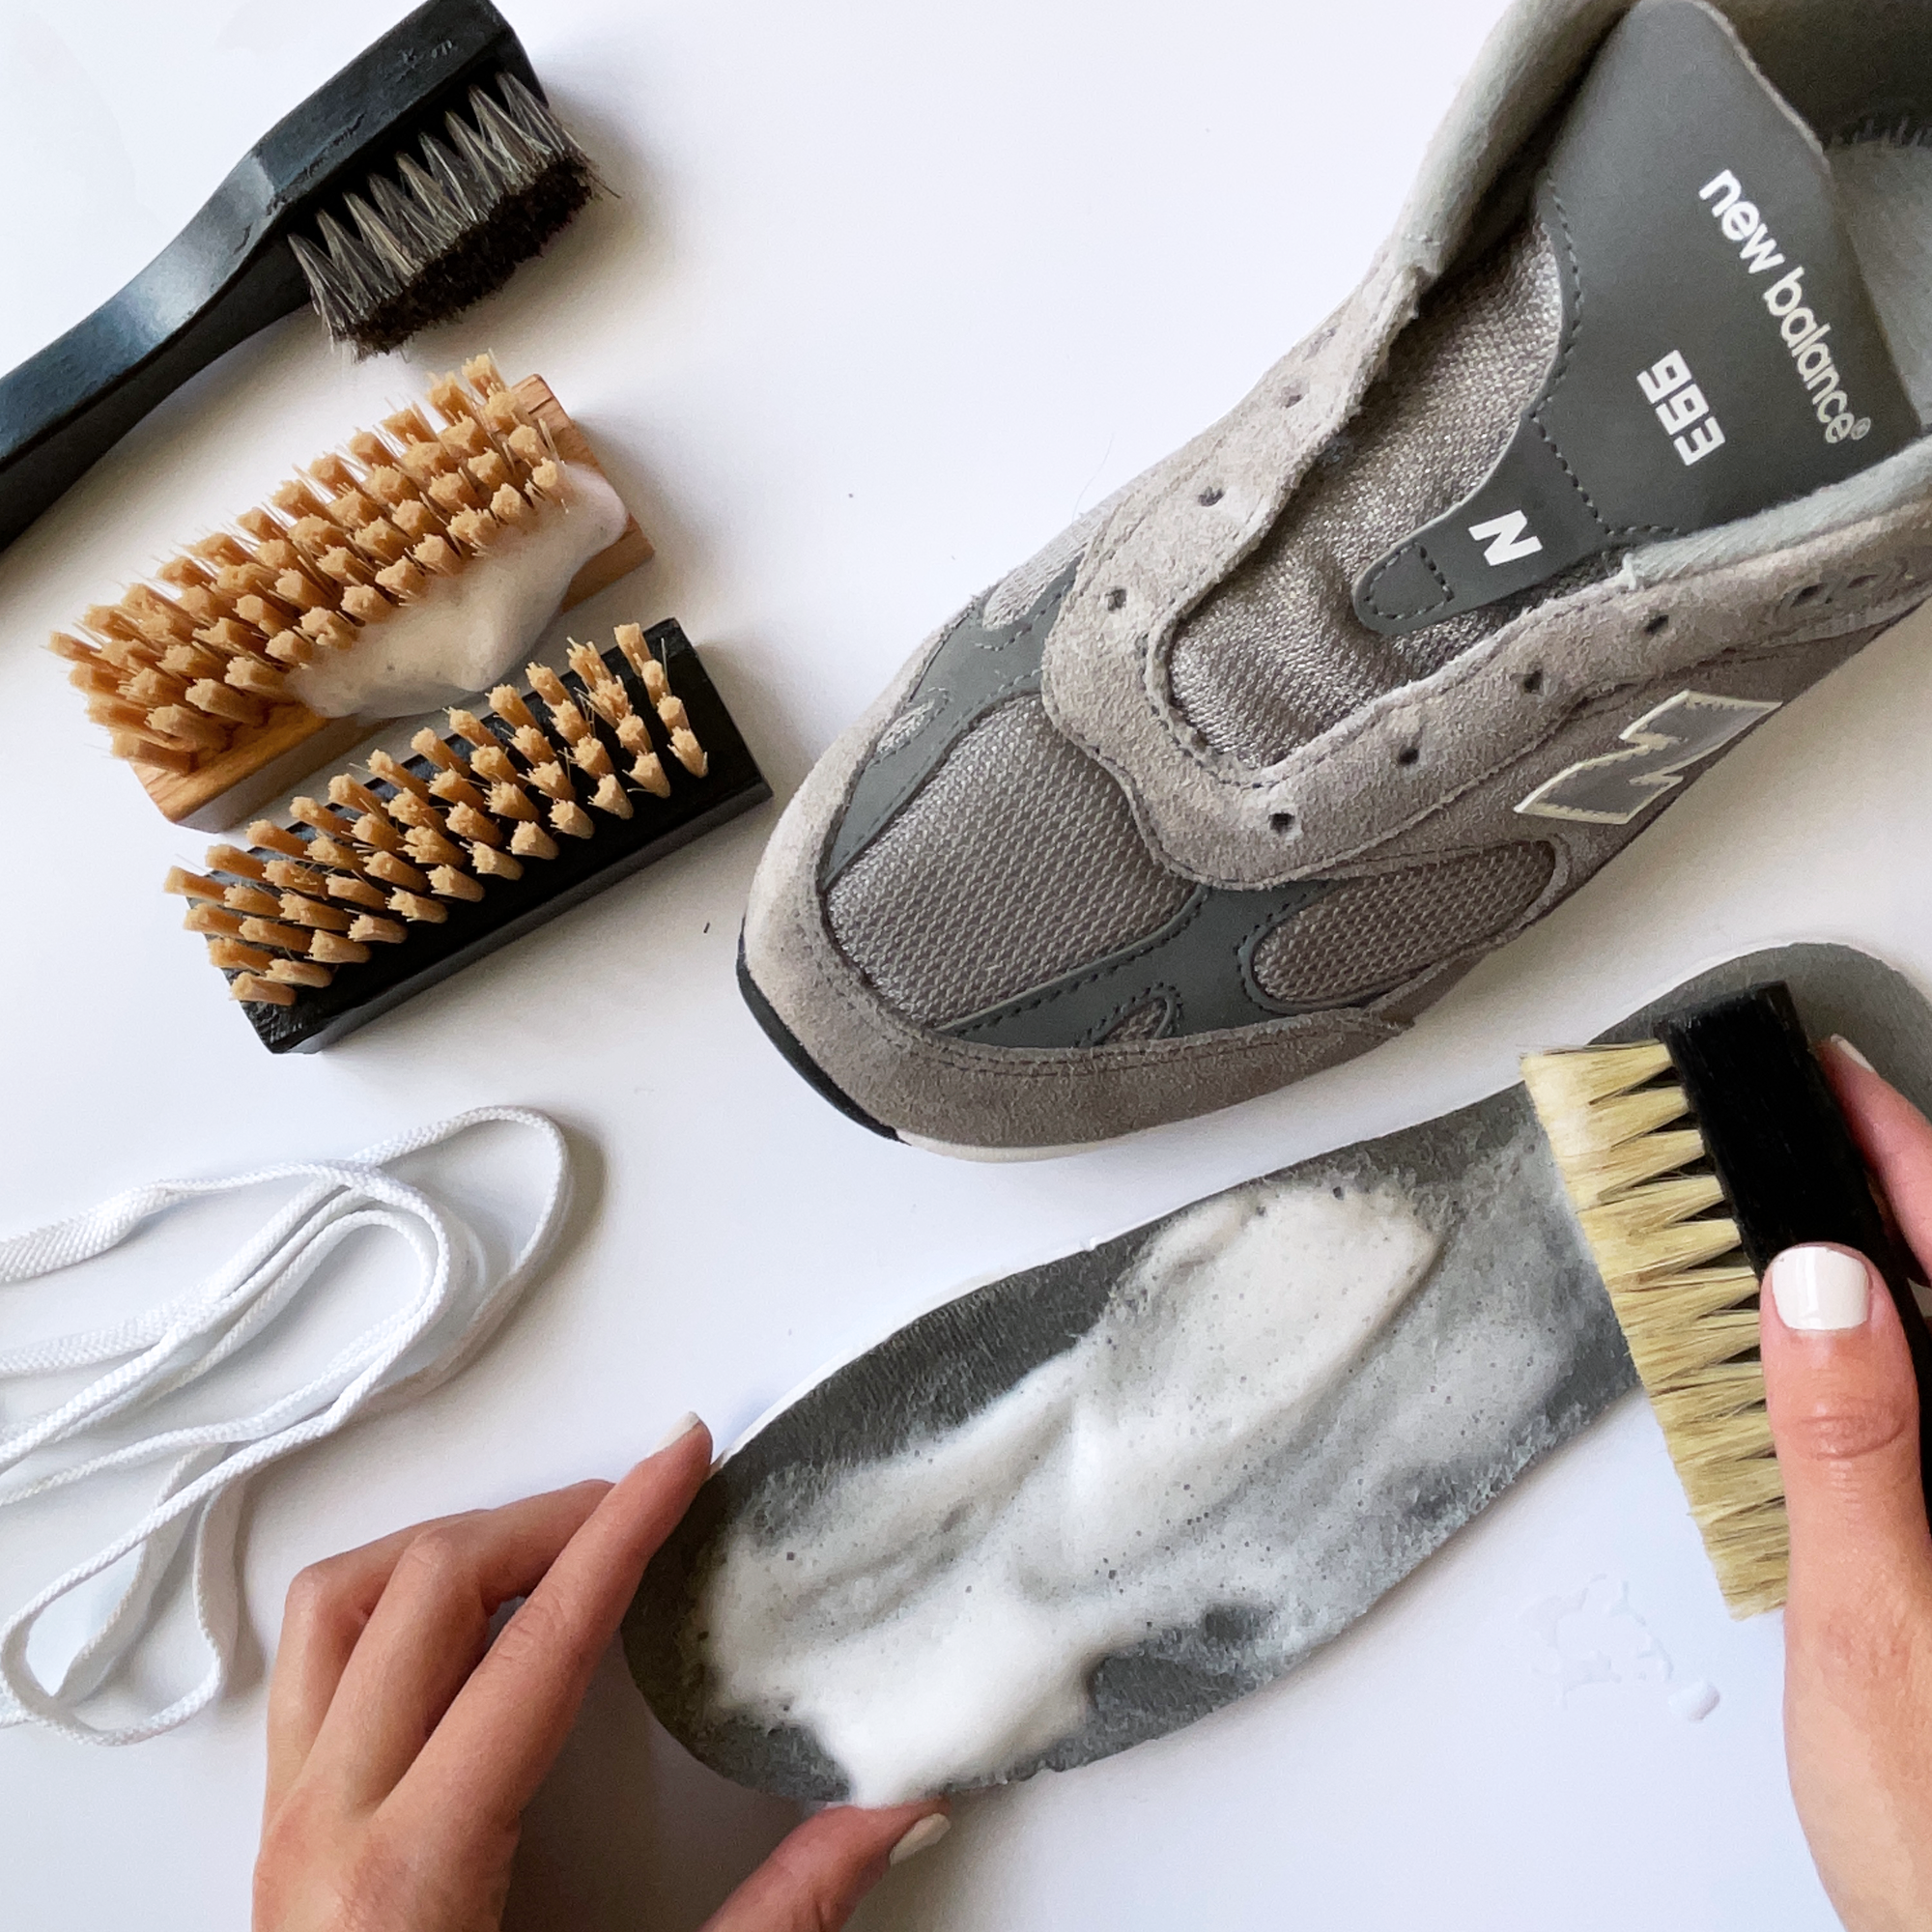 Services and Shoe Care